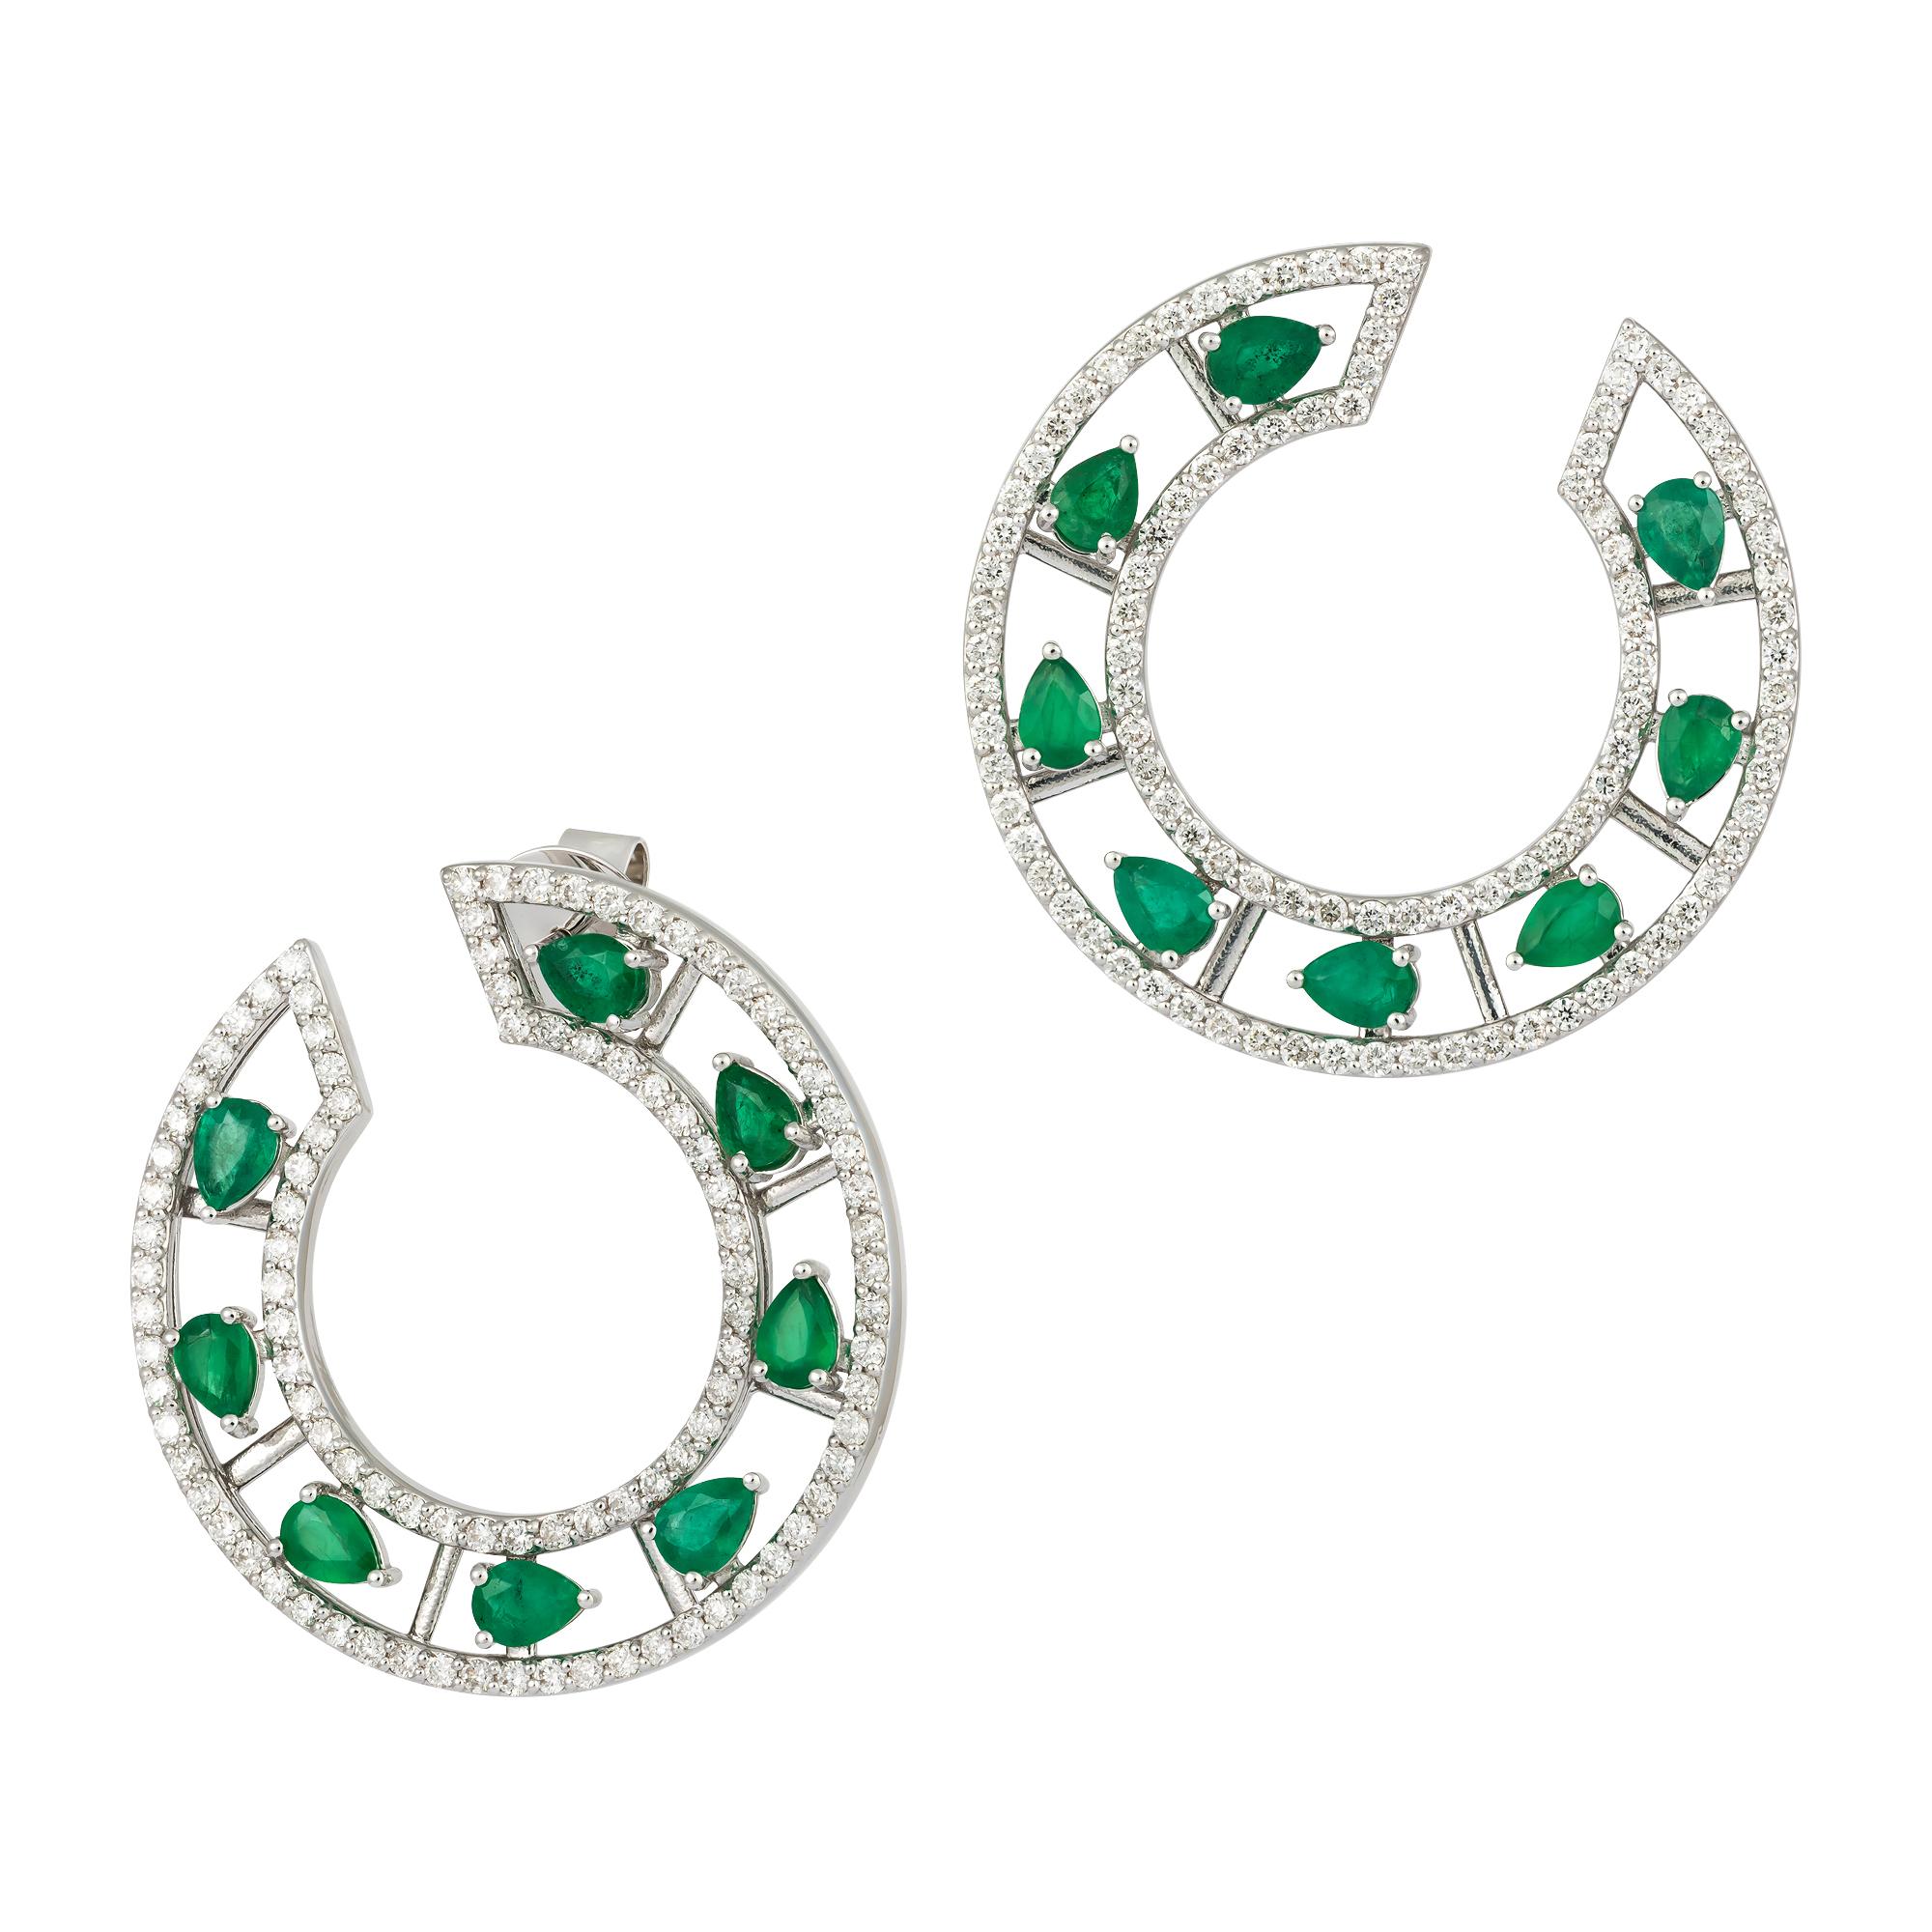 Modern Chic White Yellow Gold 18K Earrings Emerald Diamond For Her For Sale